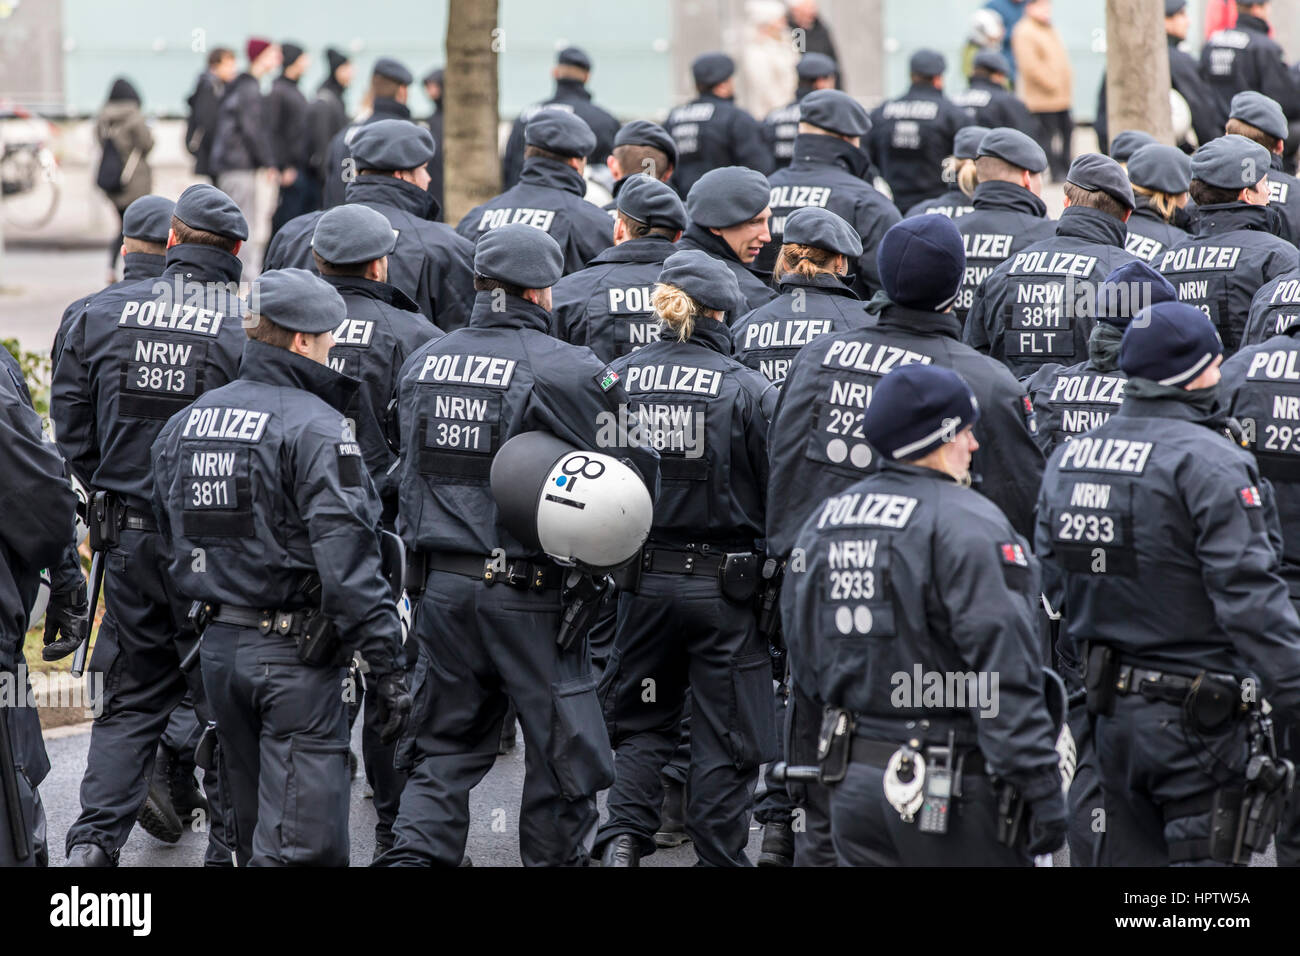 German riot police unit during a demonstration in Dortmund, Germany, Stock Photo